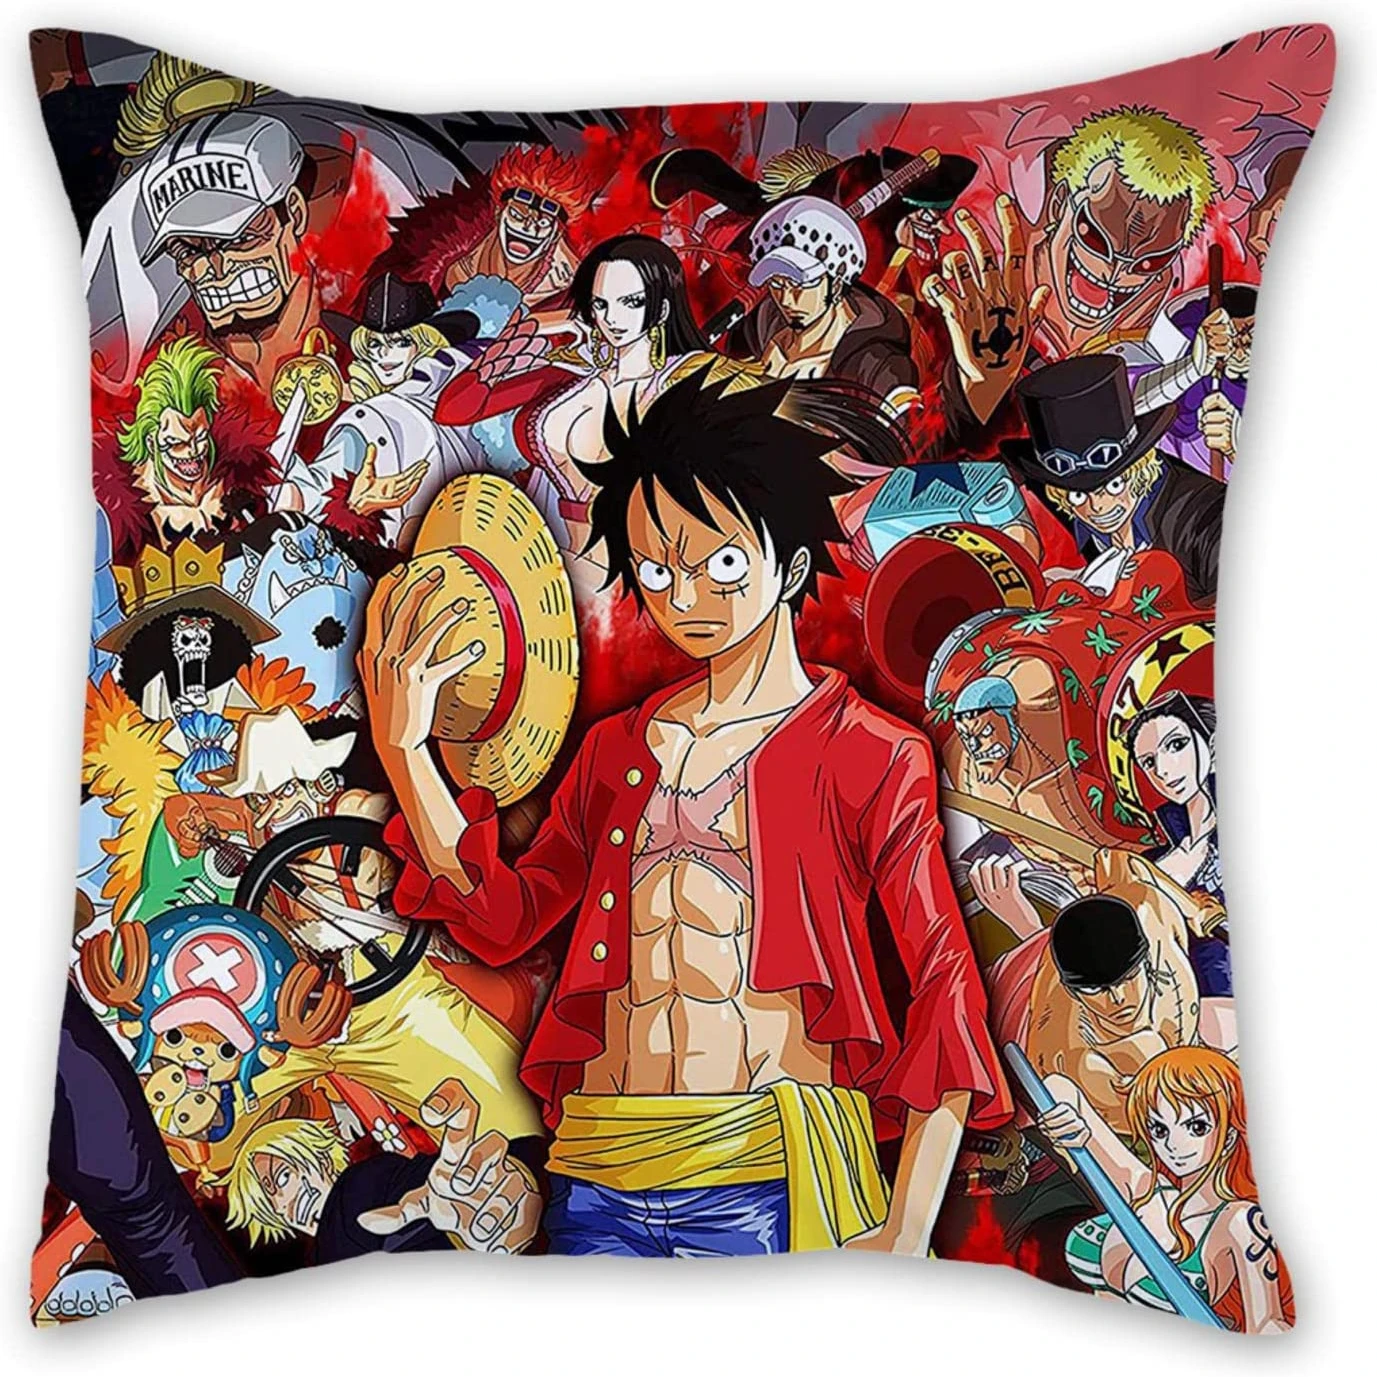 

Cool Anime Pillowcase Pillow Covers Decorative Pillowcases for Pillows Cartoon Pillow Case Home Decor for Sofa Couch Bed 18x18